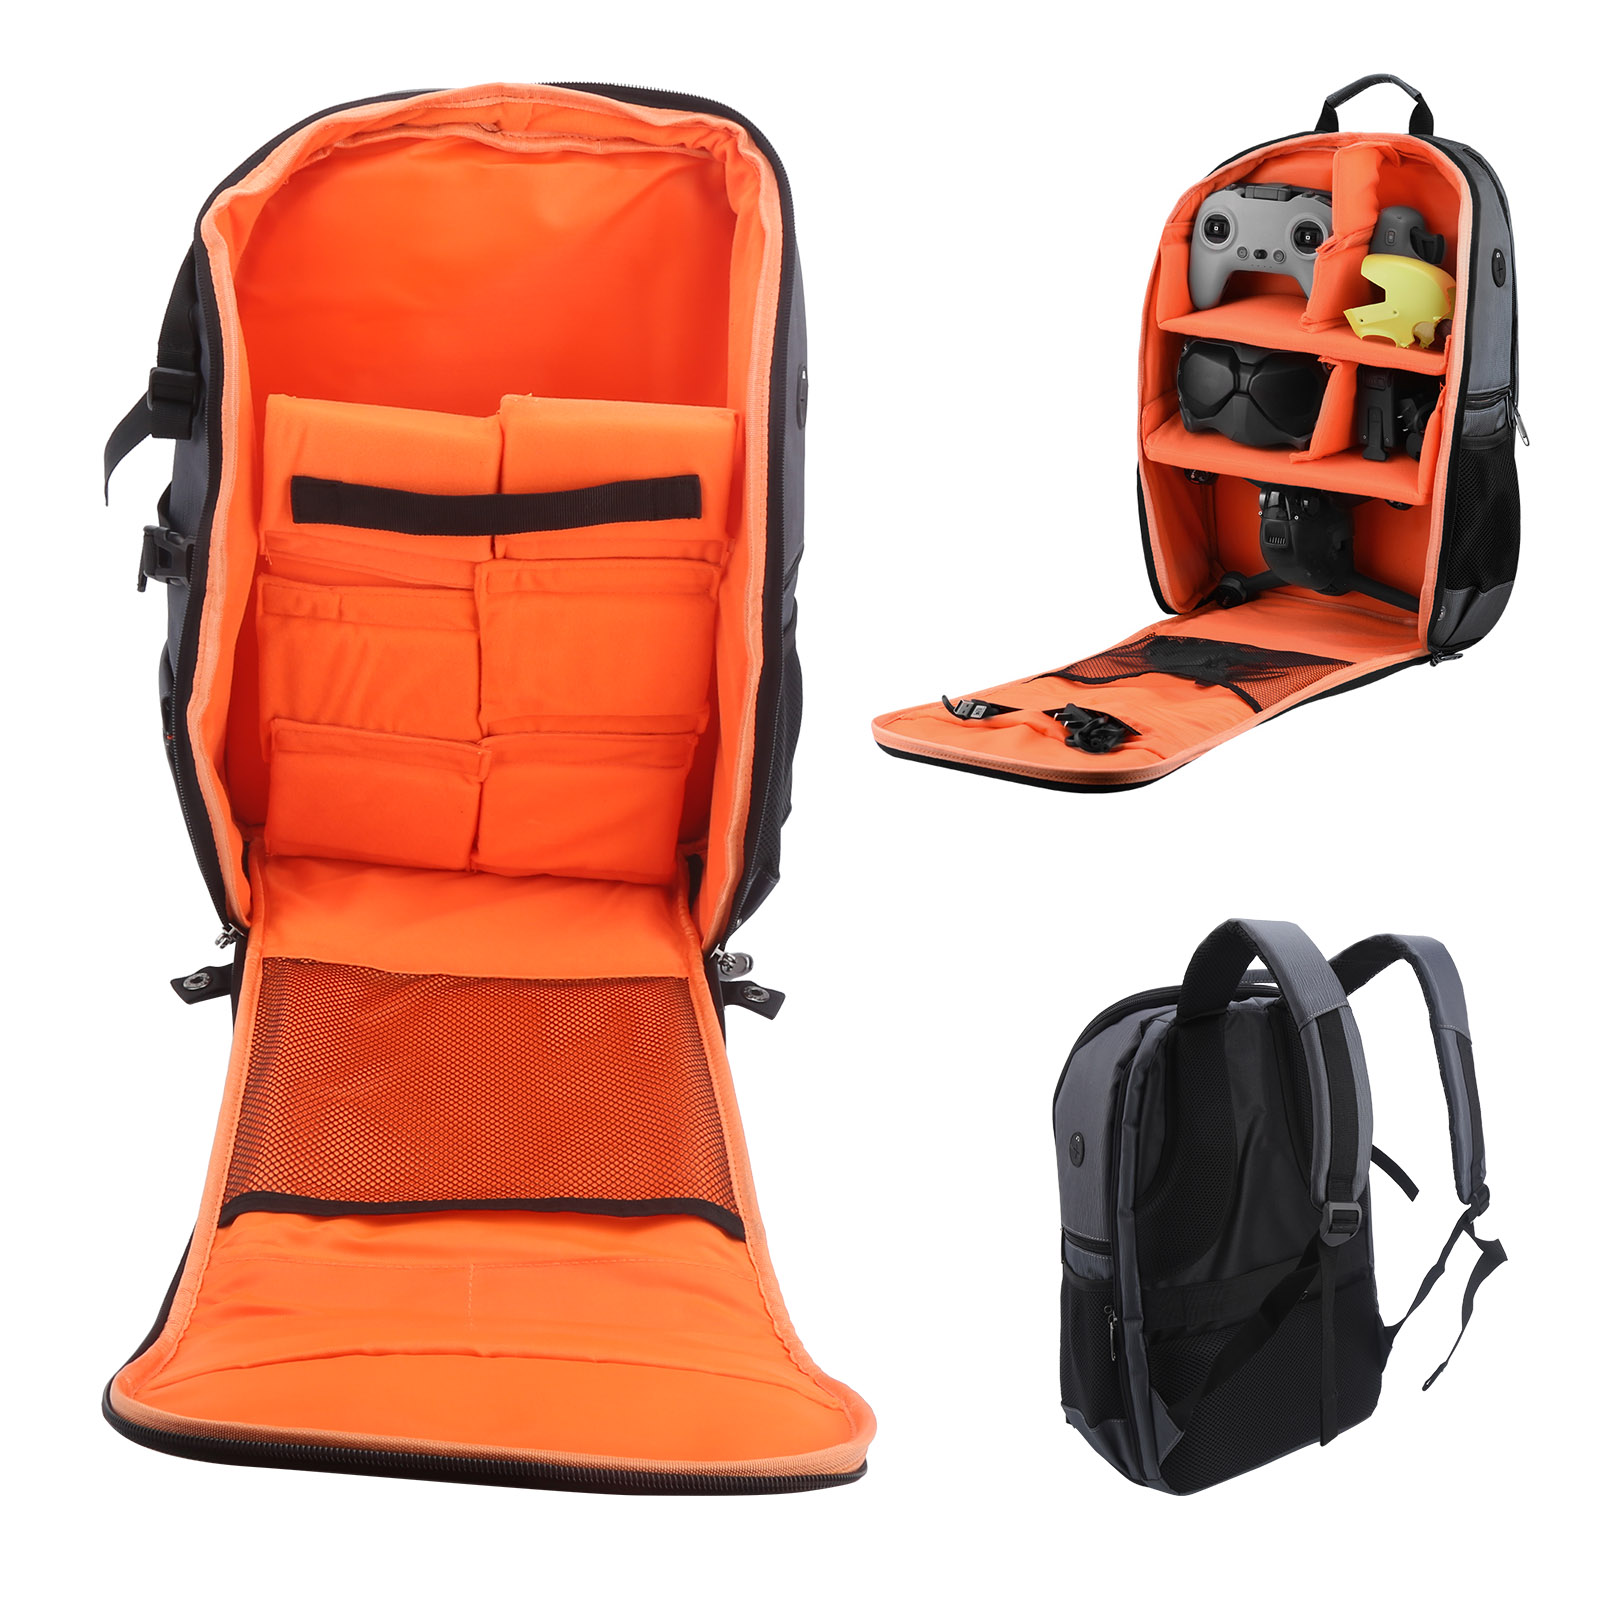 Nylon Drone Camera Backpack with Flexible Dividers